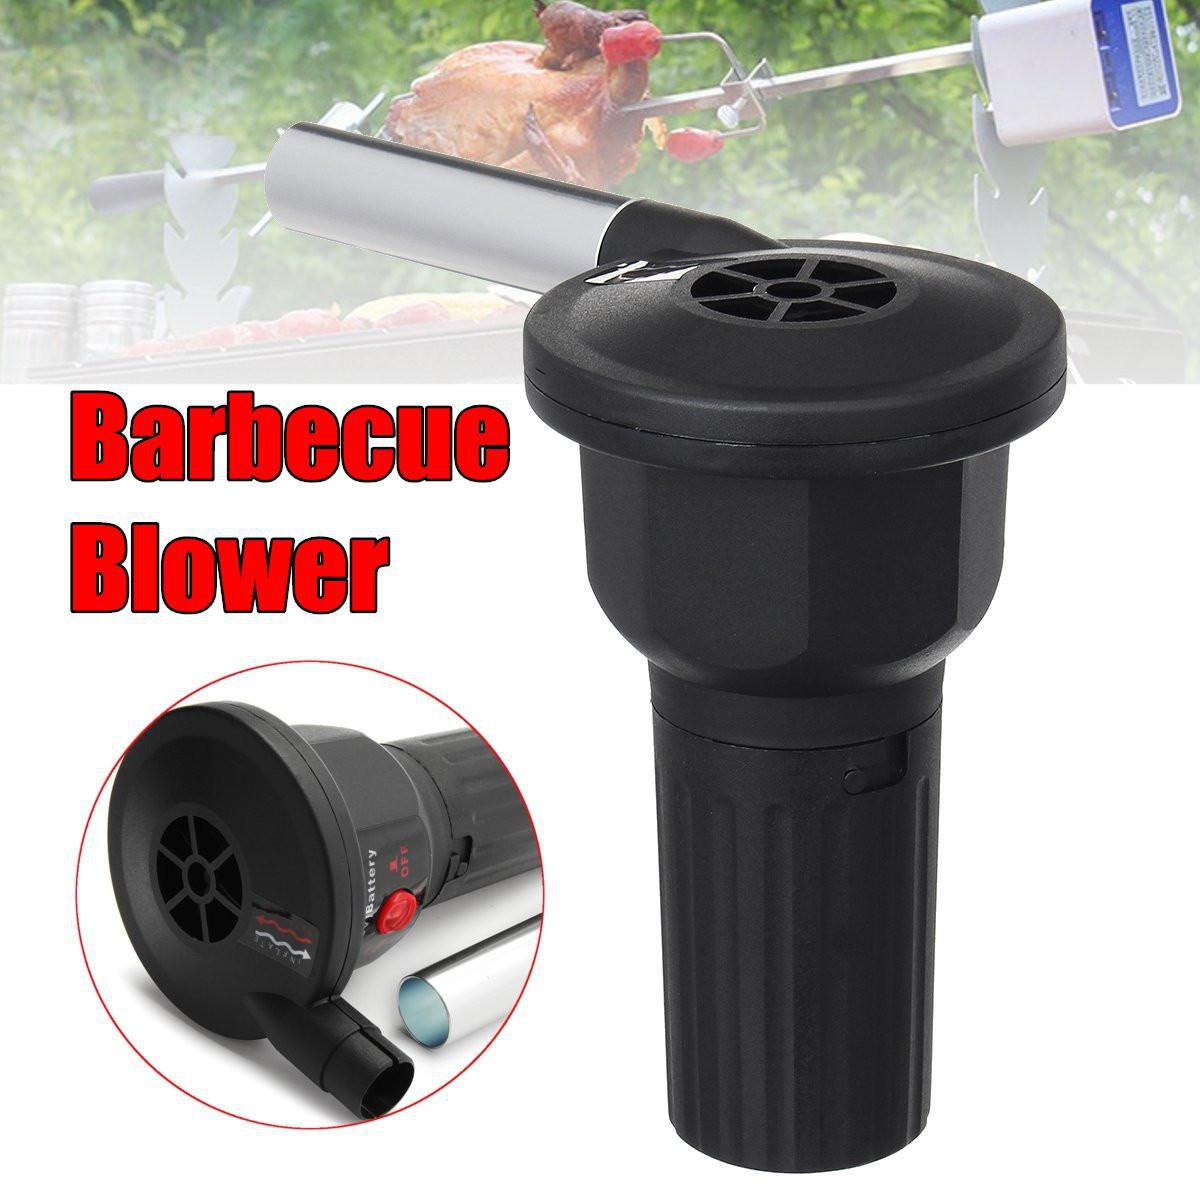 1.5V BBQ Barbecue Air Blower Motor Grill Poker Electric Blowing Charcoal PP